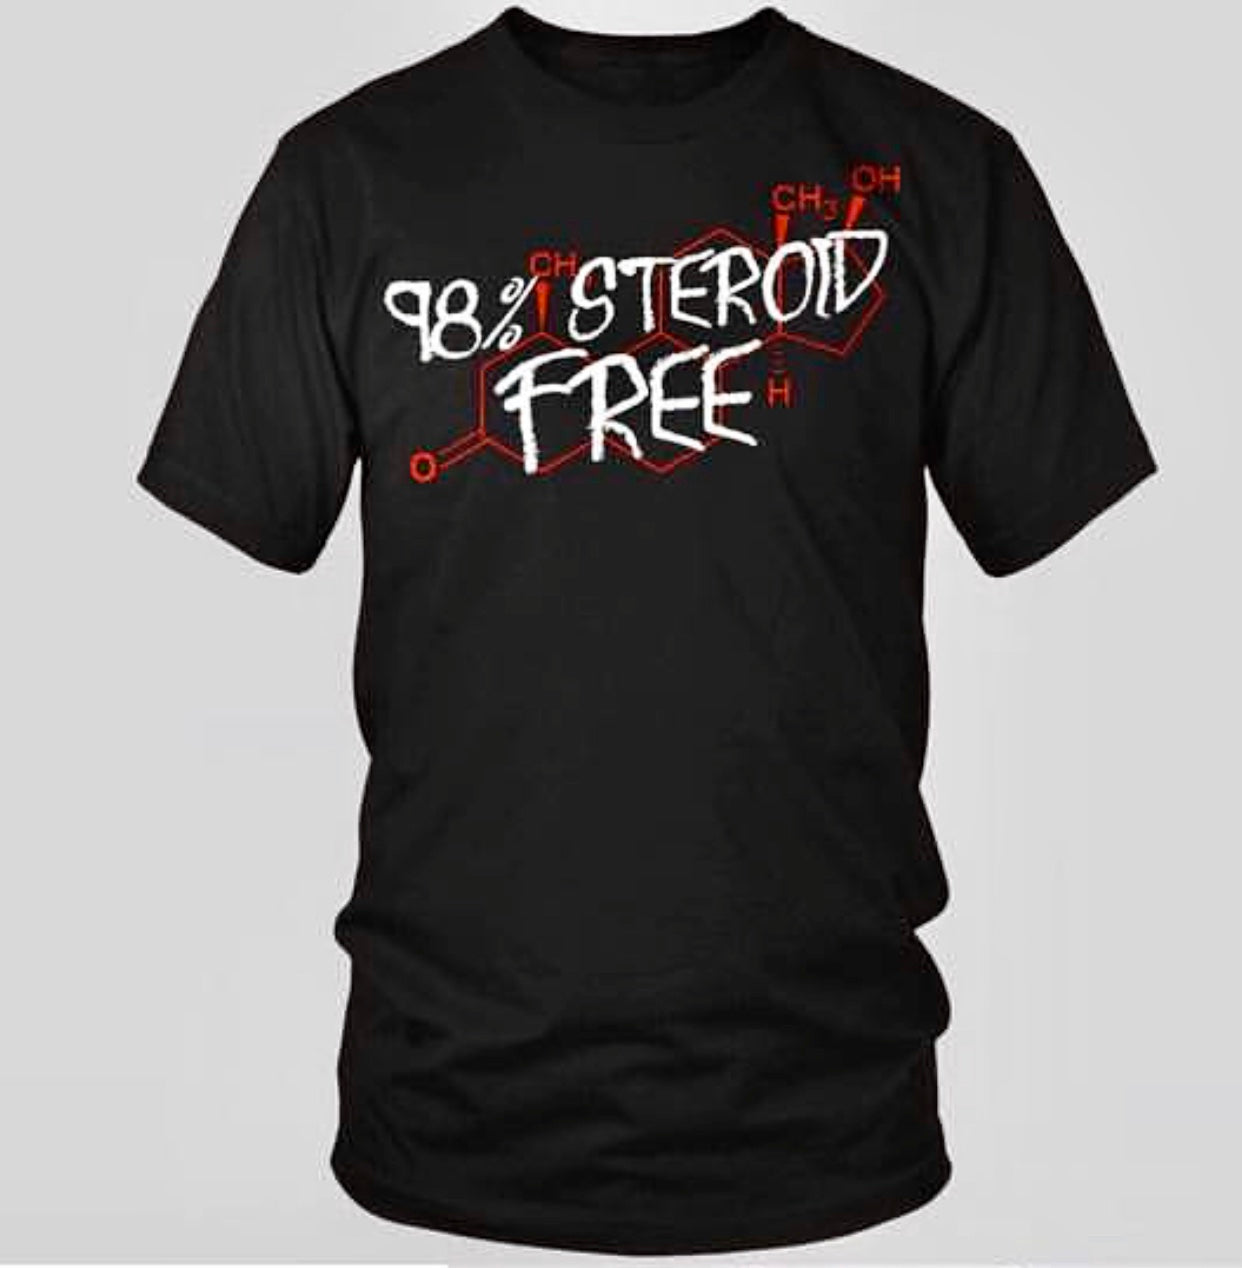 98% Steroid Free